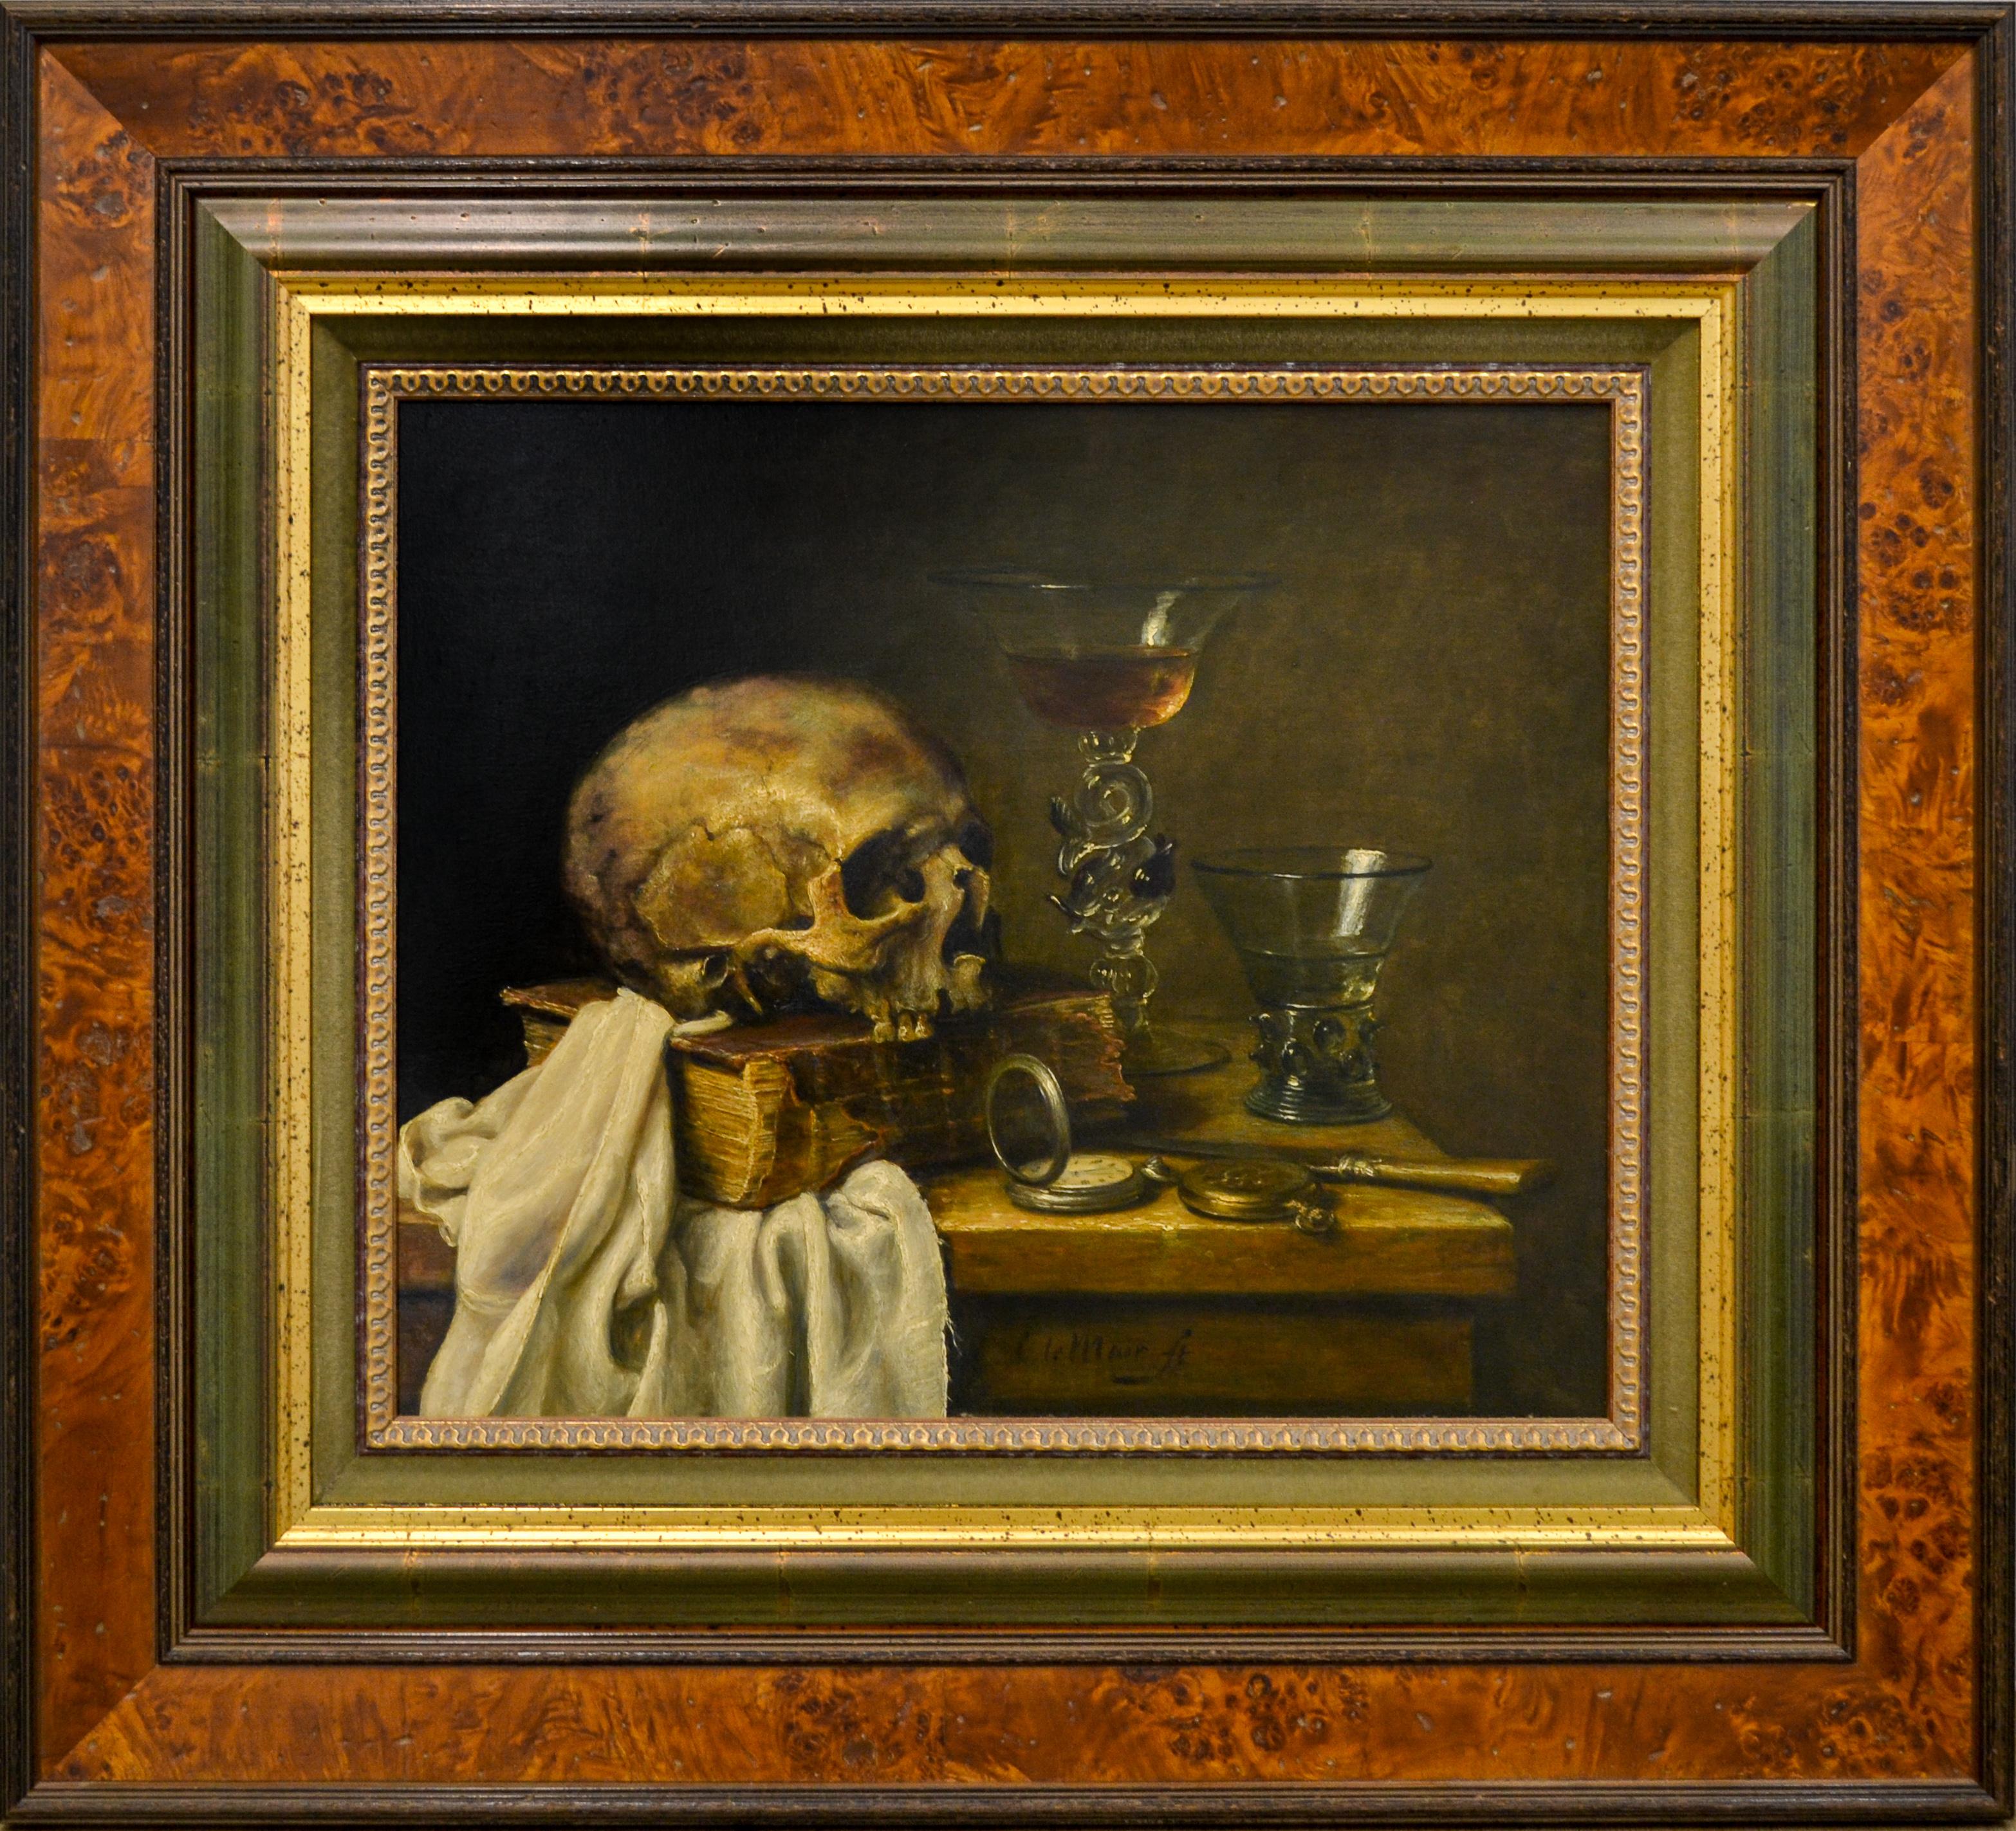 Skull with Book, Venetian Glass, Rummer, Knife and Pocket Watch Dutch Still-Life - Painting by Cornelis Le Mair